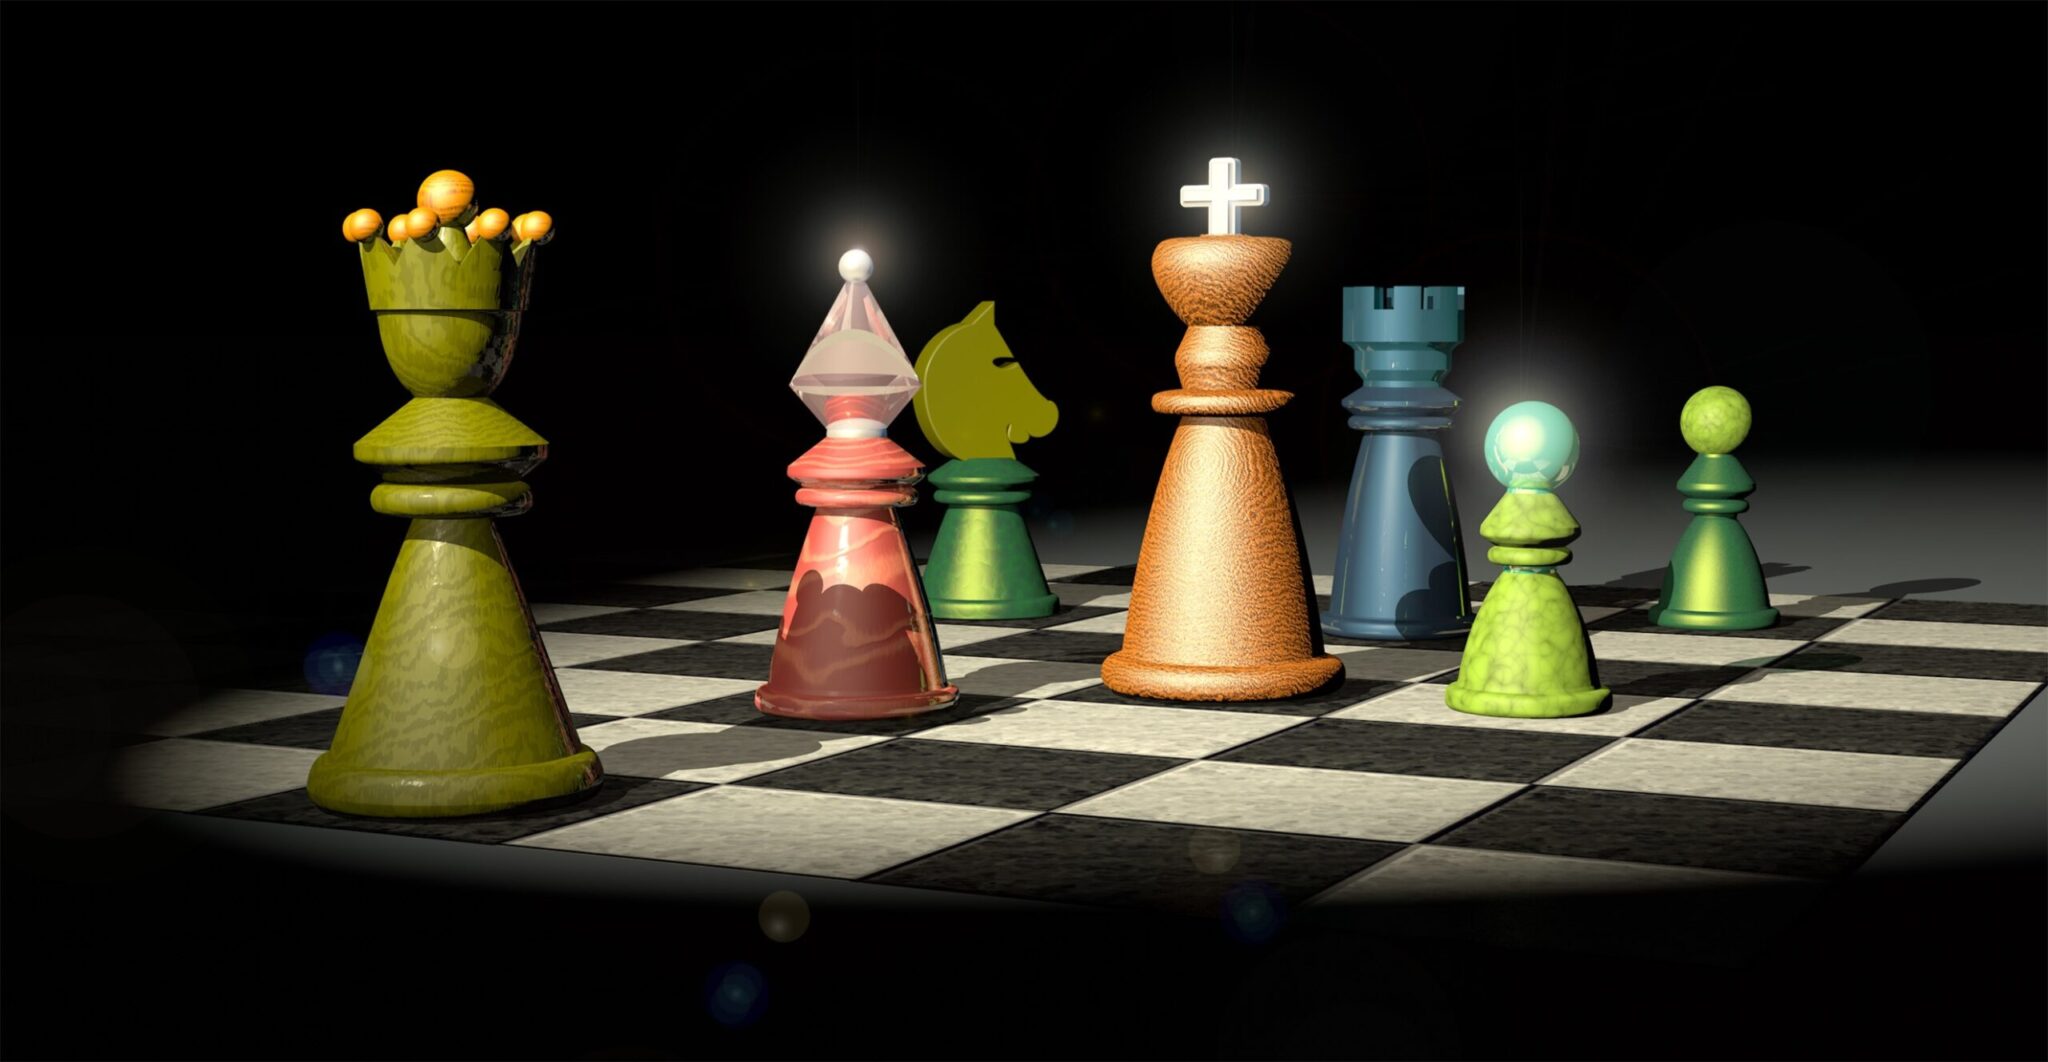 image of a chess board with 7 different colored pieces on the board to represent essentials for the game